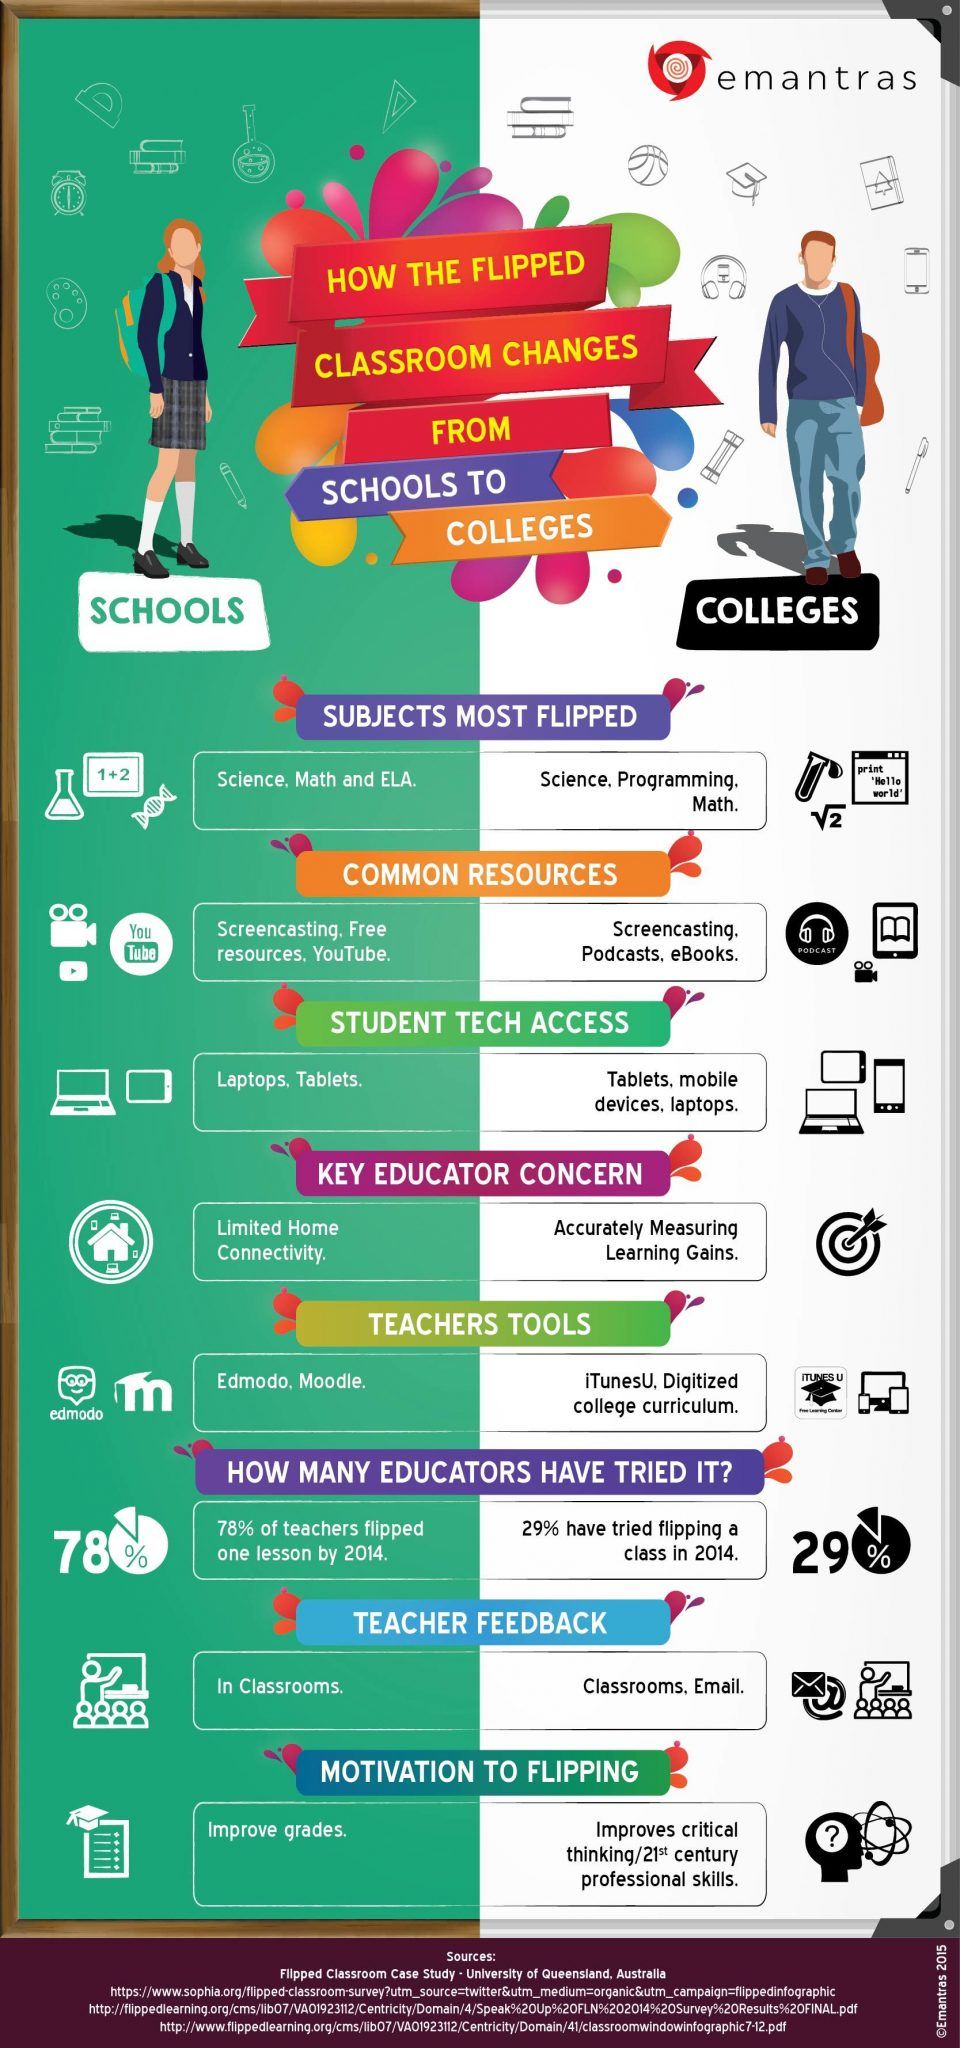 How Flipped Classrooms Change from Schools to Colleges Infographic